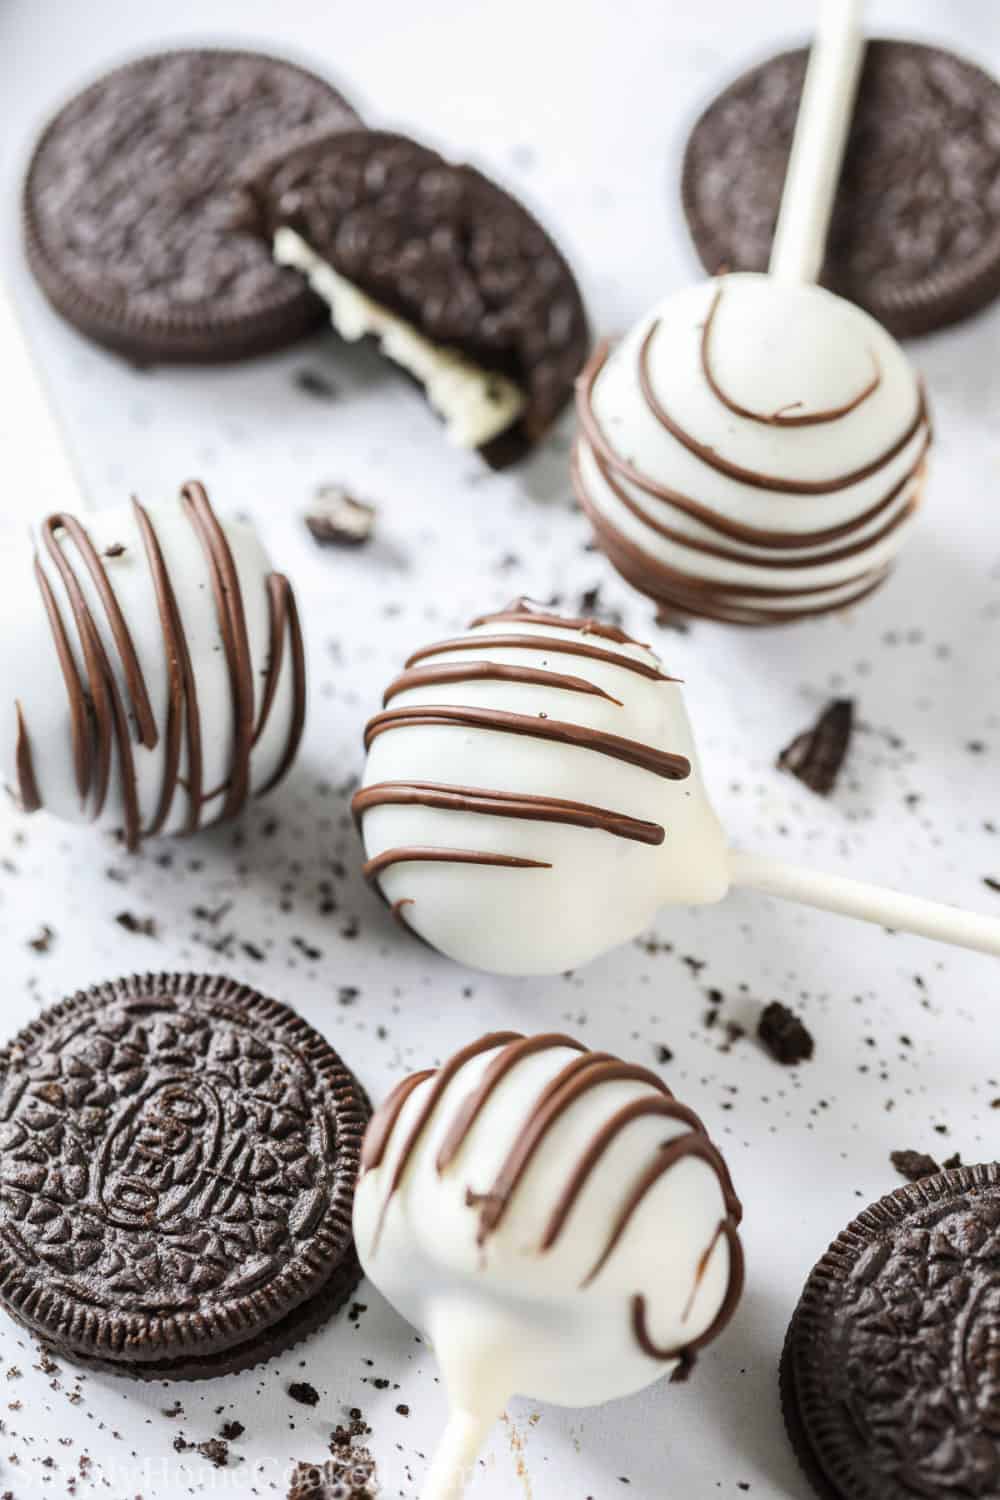 Overleve hovedlandet zoom Oreo Cake Pops (VIDEO) - Simply Home Cooked